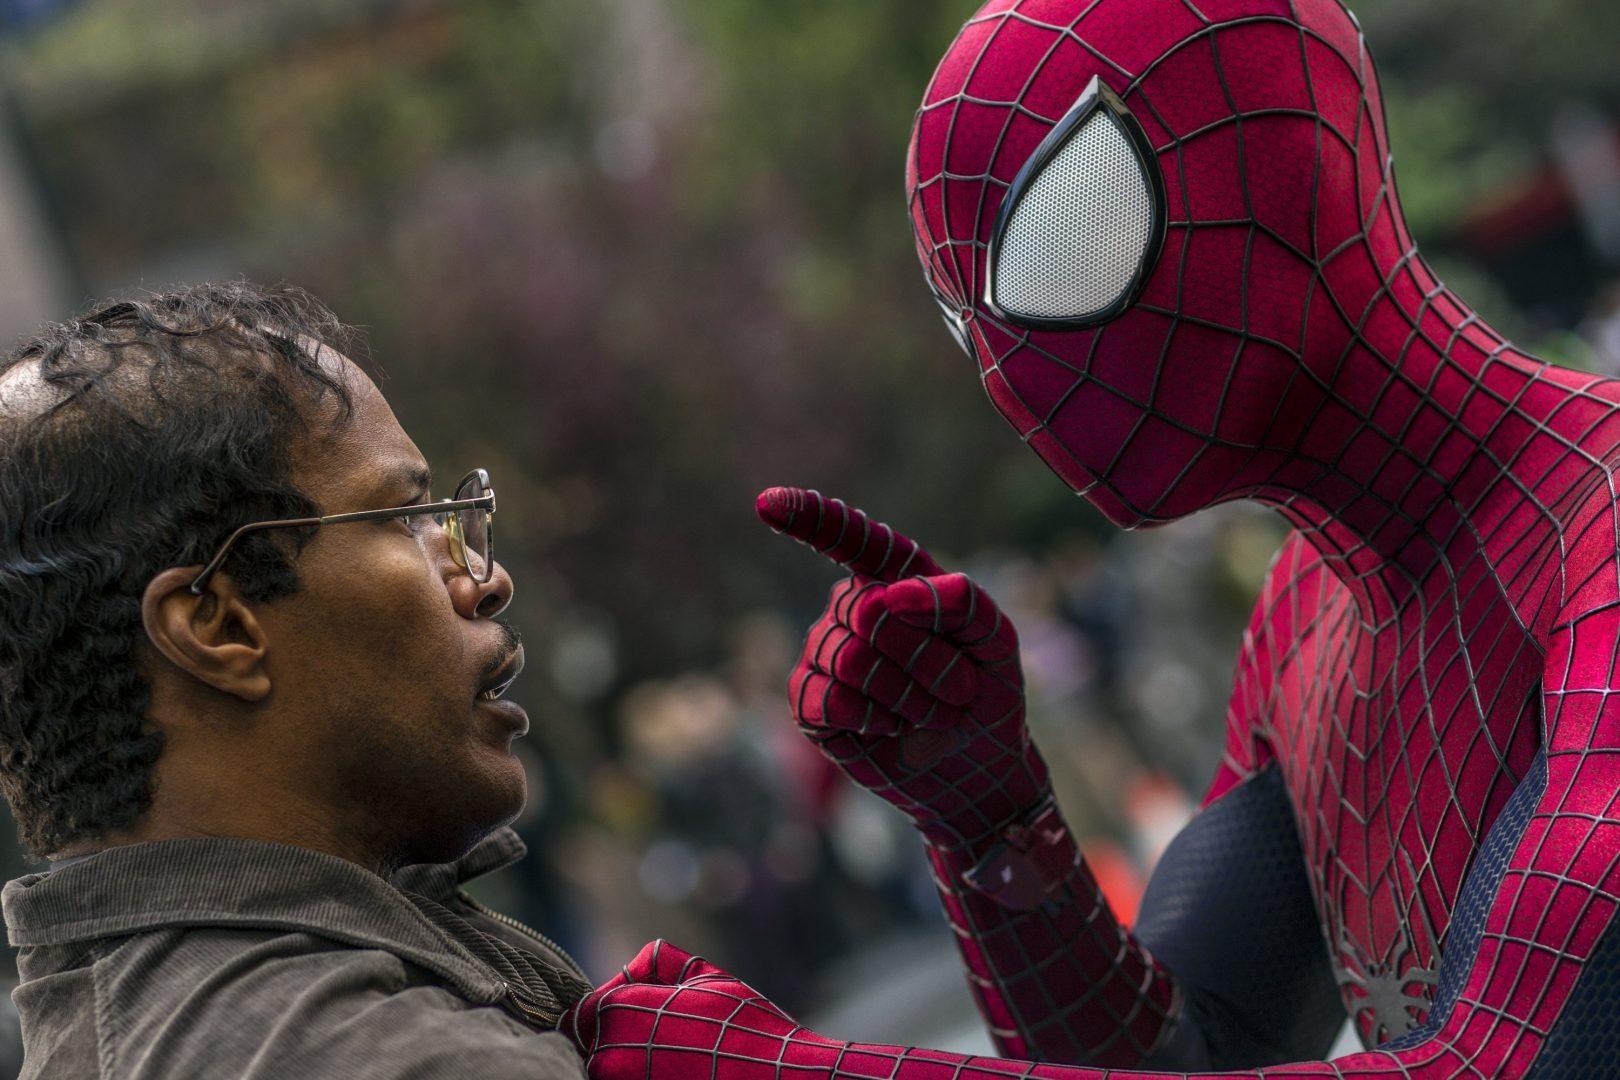 Jamie Foxx and Andrew Garfield star in The Amazing Spider-Man. (Niko Tavernise/Columba Pictures/MCT)